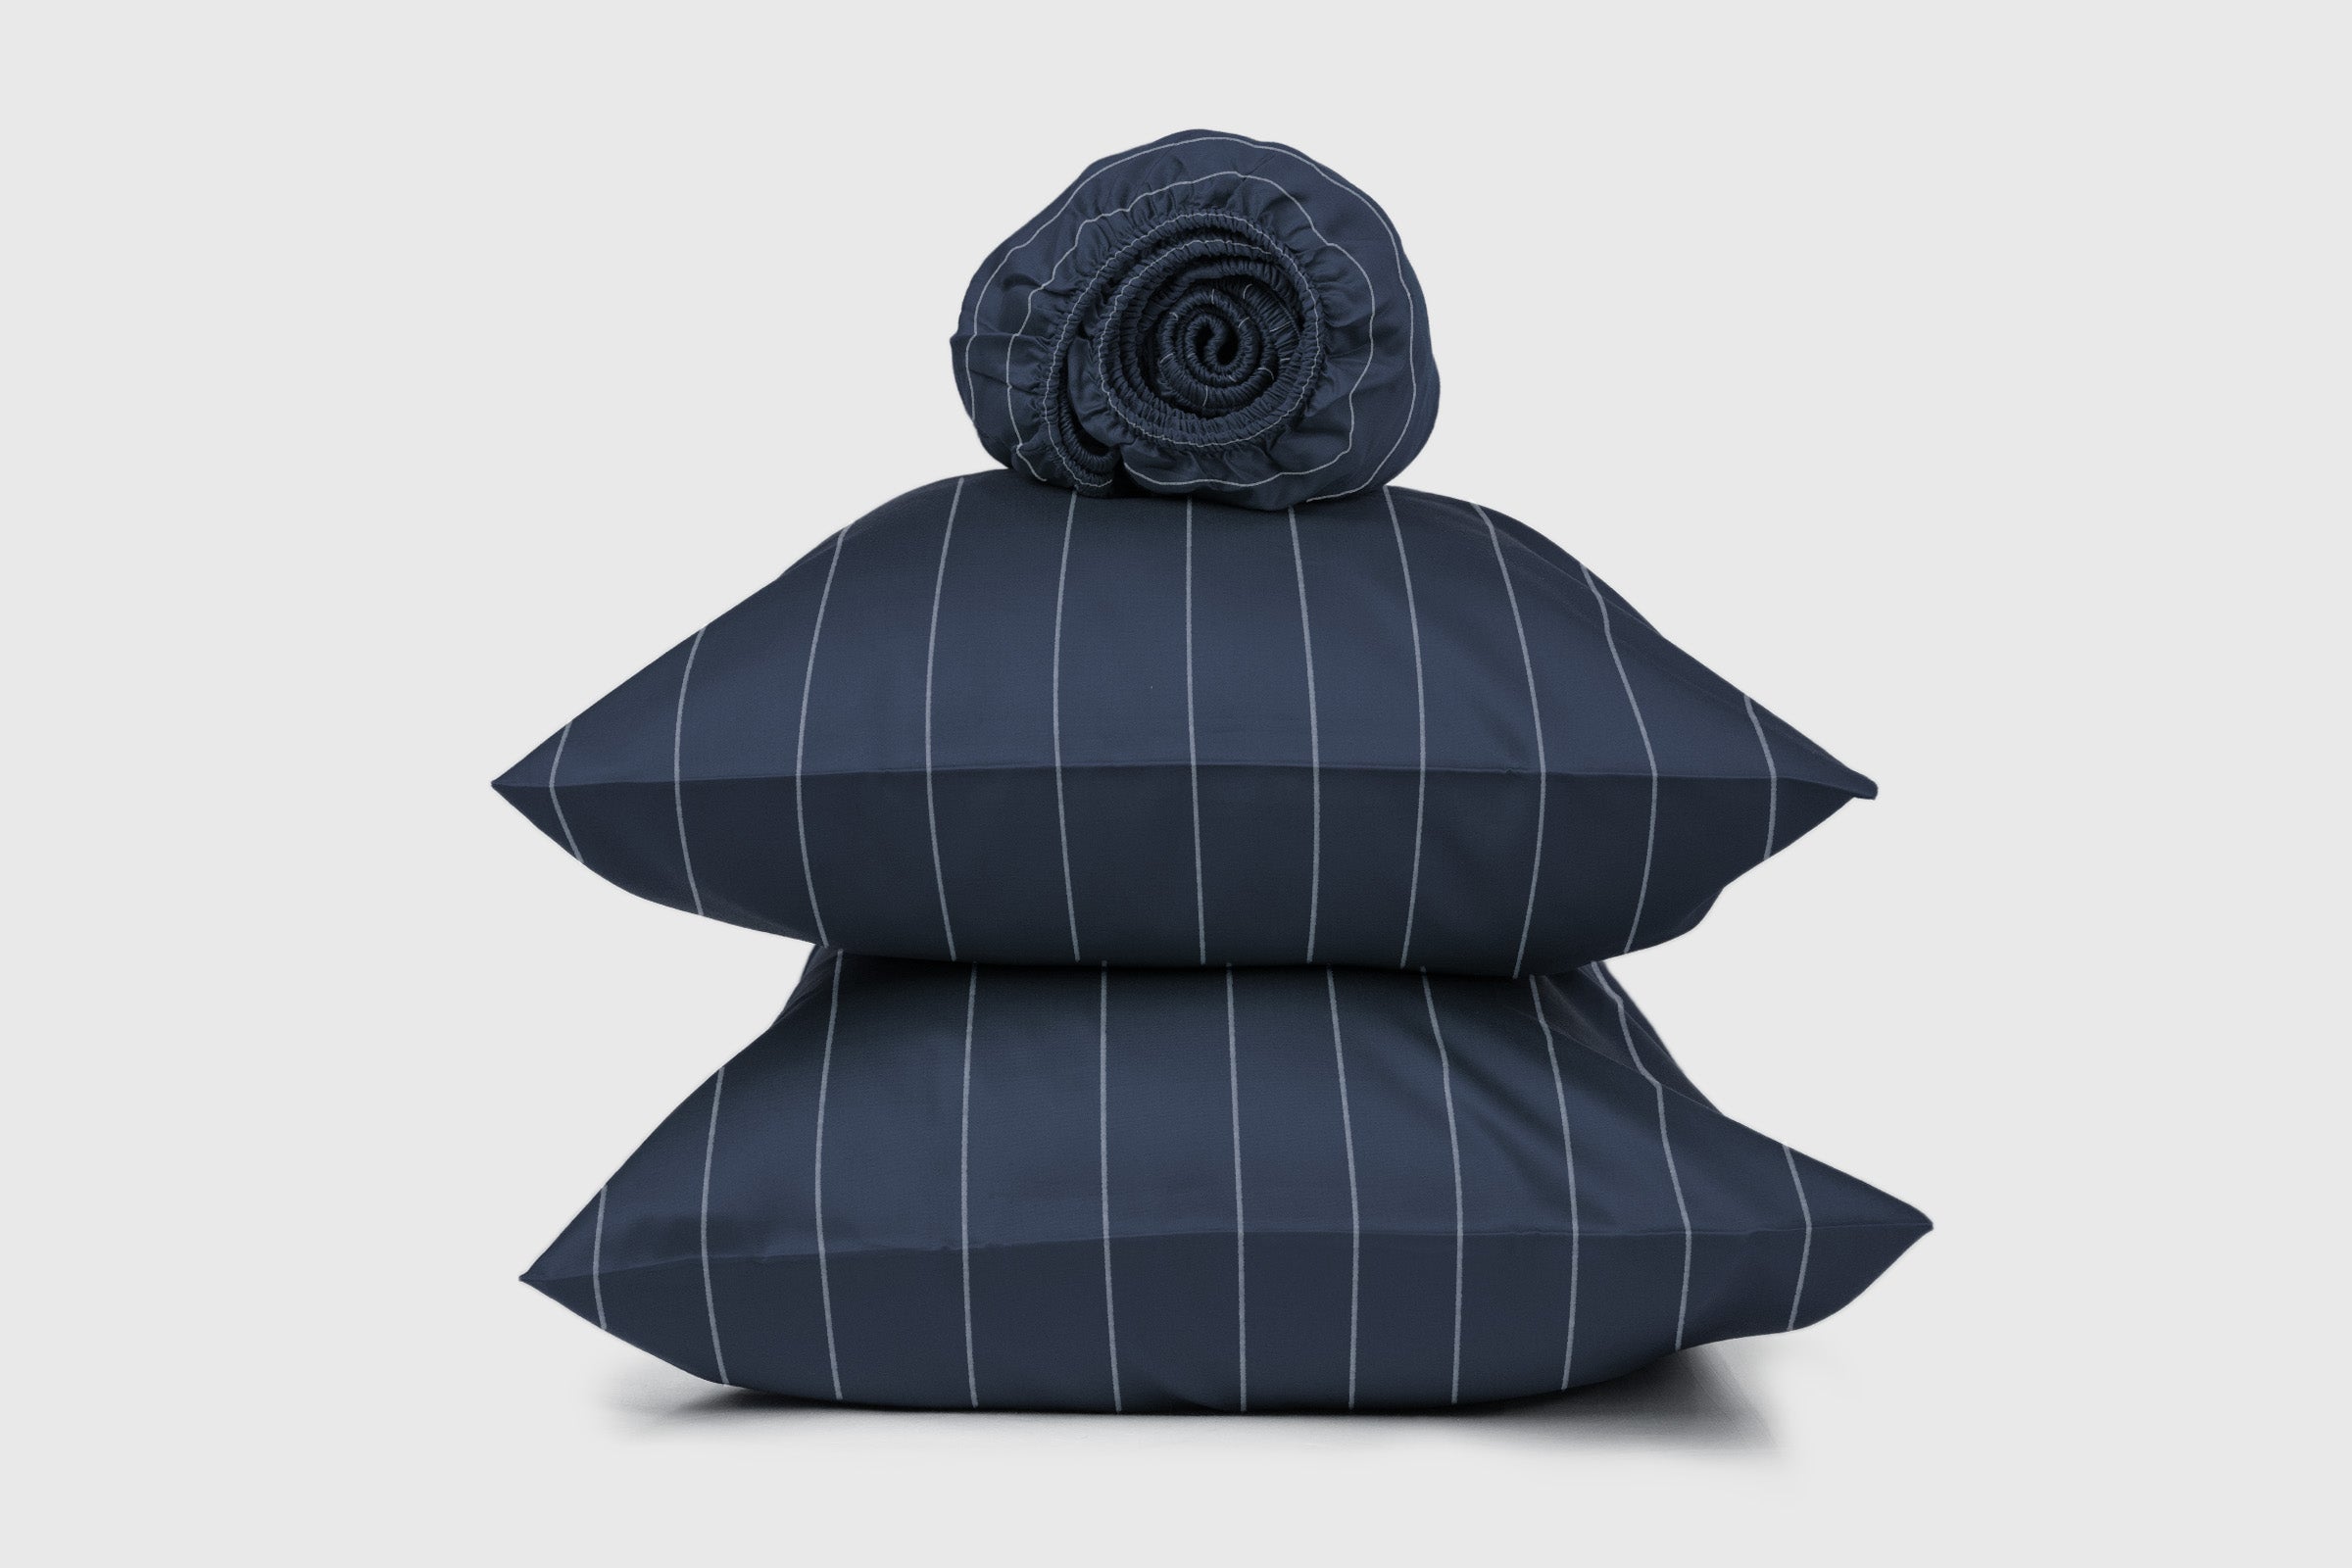 classic-navy-pinstripes-sheet-set-fitted-sheet-pillowcase-pair-by-sojao.jpg